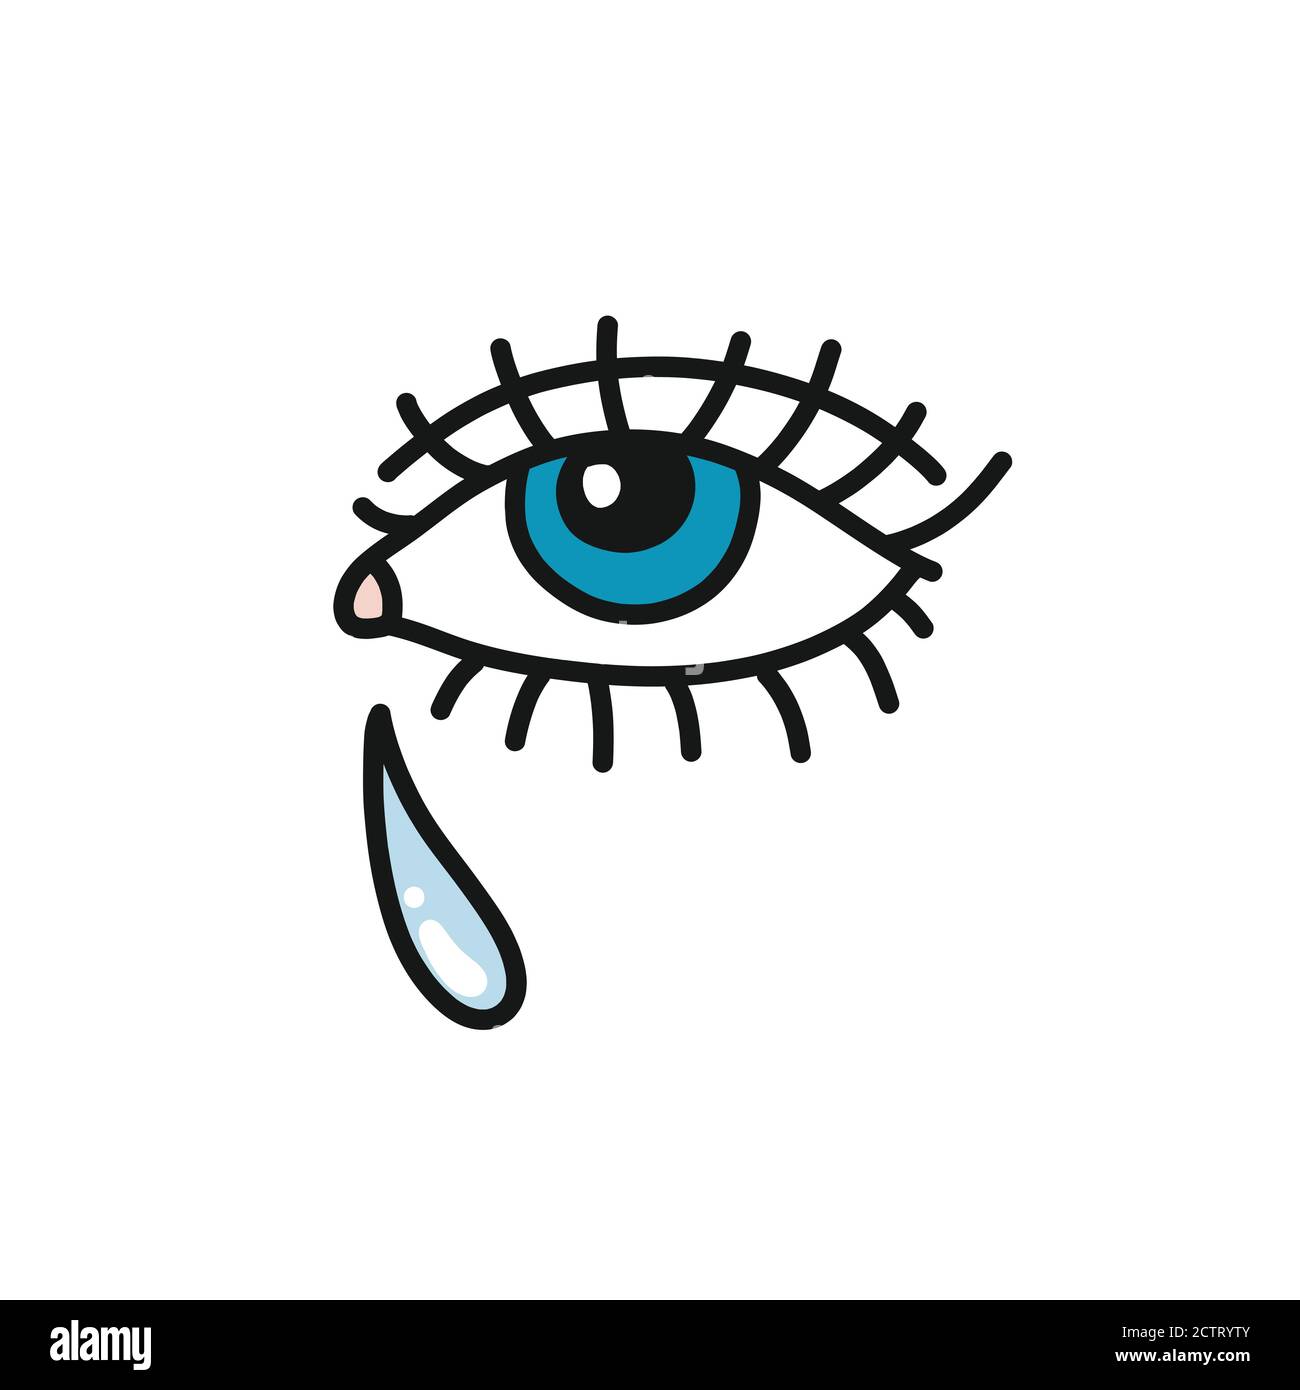 crying eye doodle icon, vector illustration Stock Vector Image ...